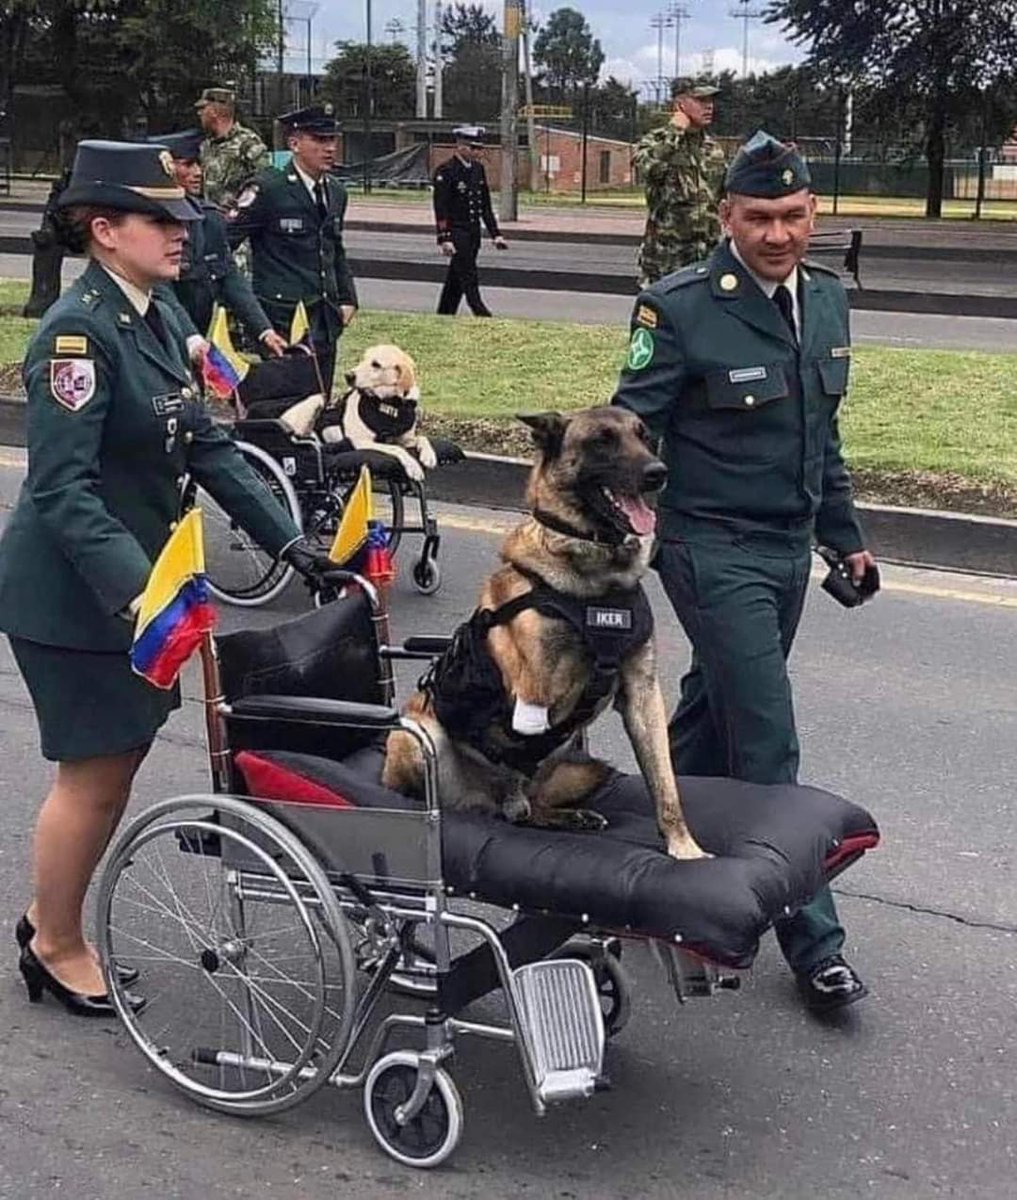 These injured service dogs got a heroes welcome as they returned from surgery ❤️